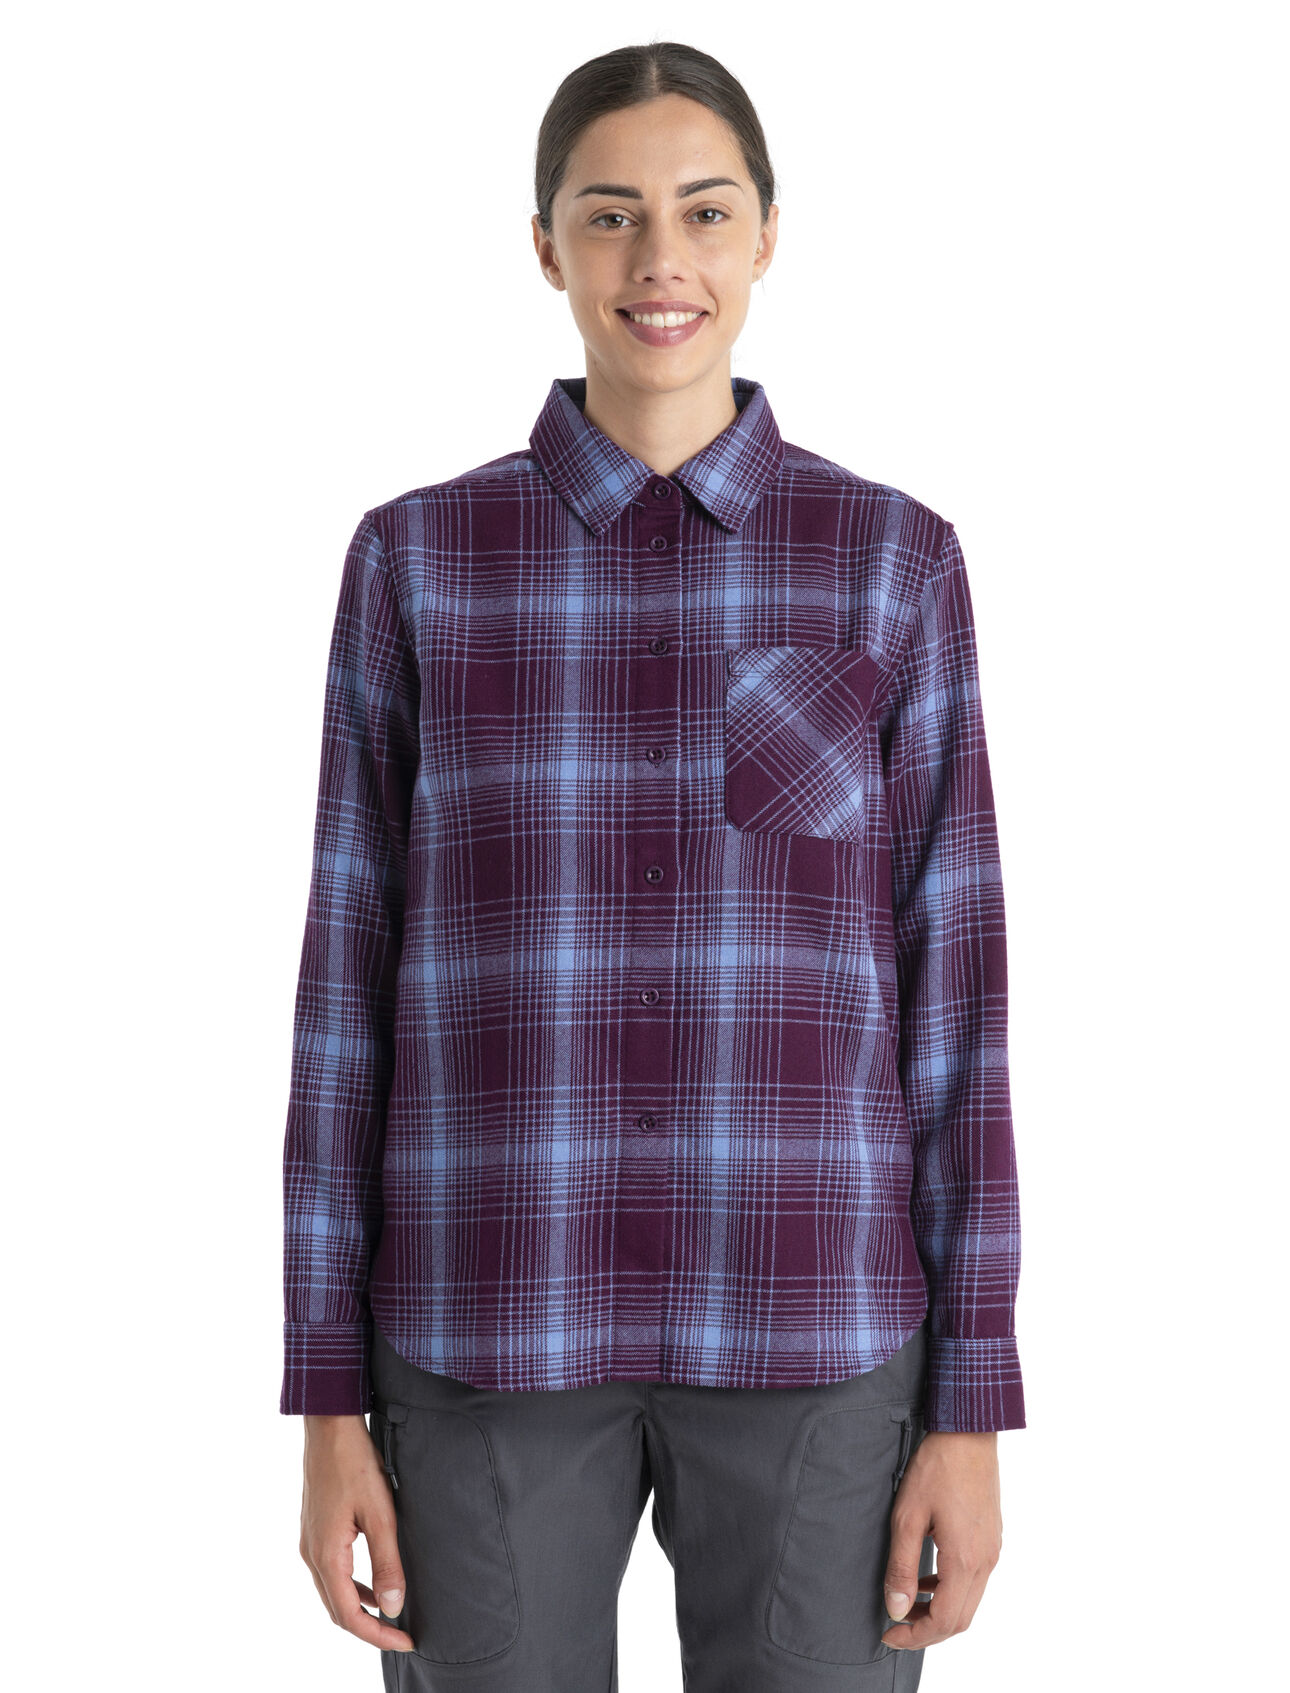 Womens Merino 200 Dawnder Long Sleeve Flannel Shirt Plaid A soft and cosy winter flannel made with classic style and 100% Merino wool, the 200 Dawnder Long Sleeve Flannel Shirt Plaid is a cold-weather wardrobe essential.